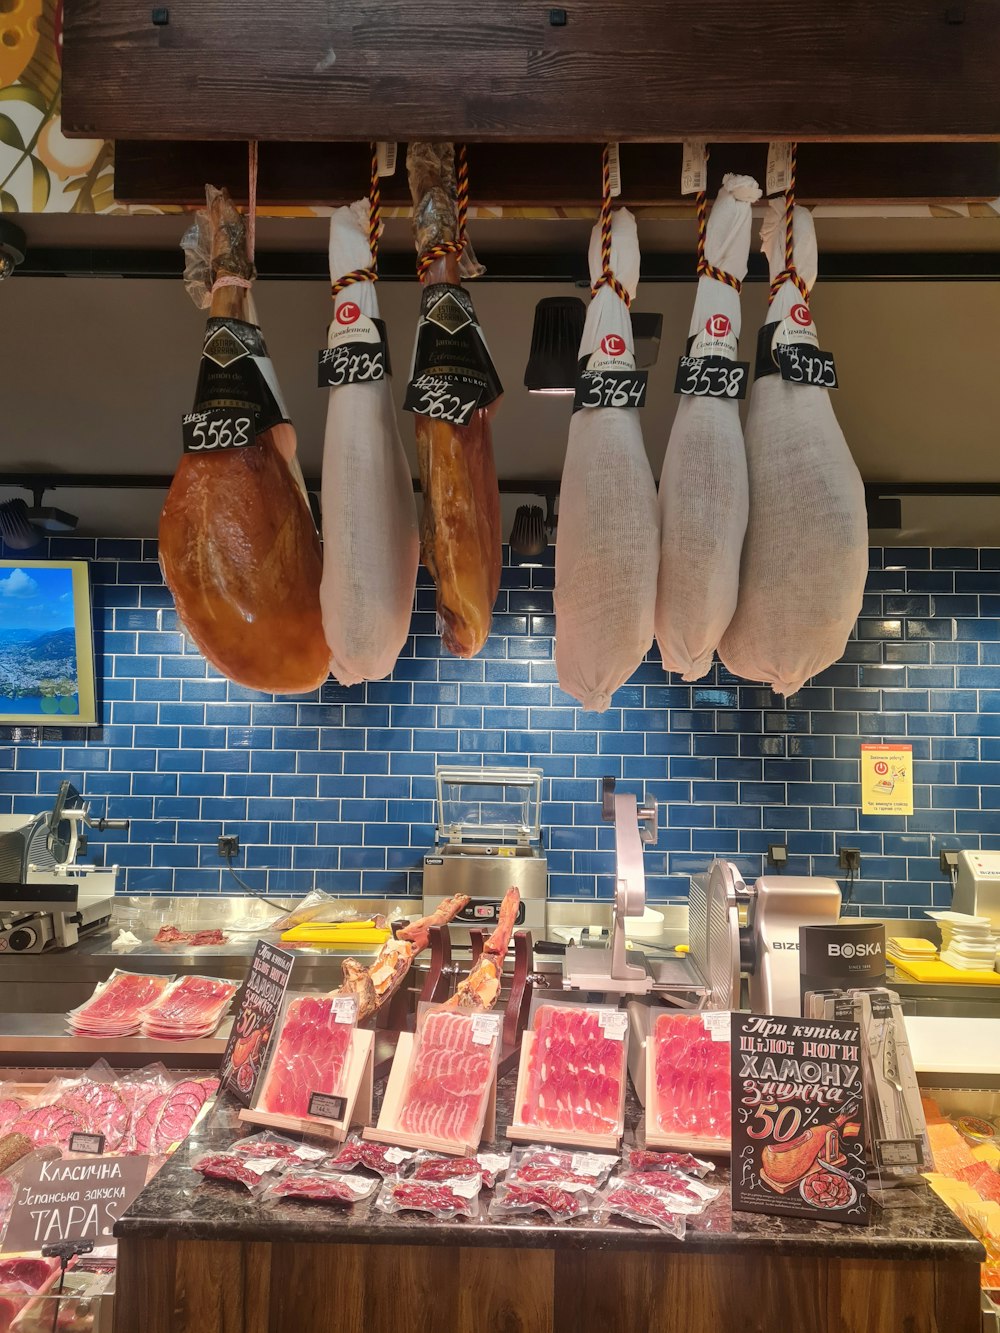 raw meat on display counter